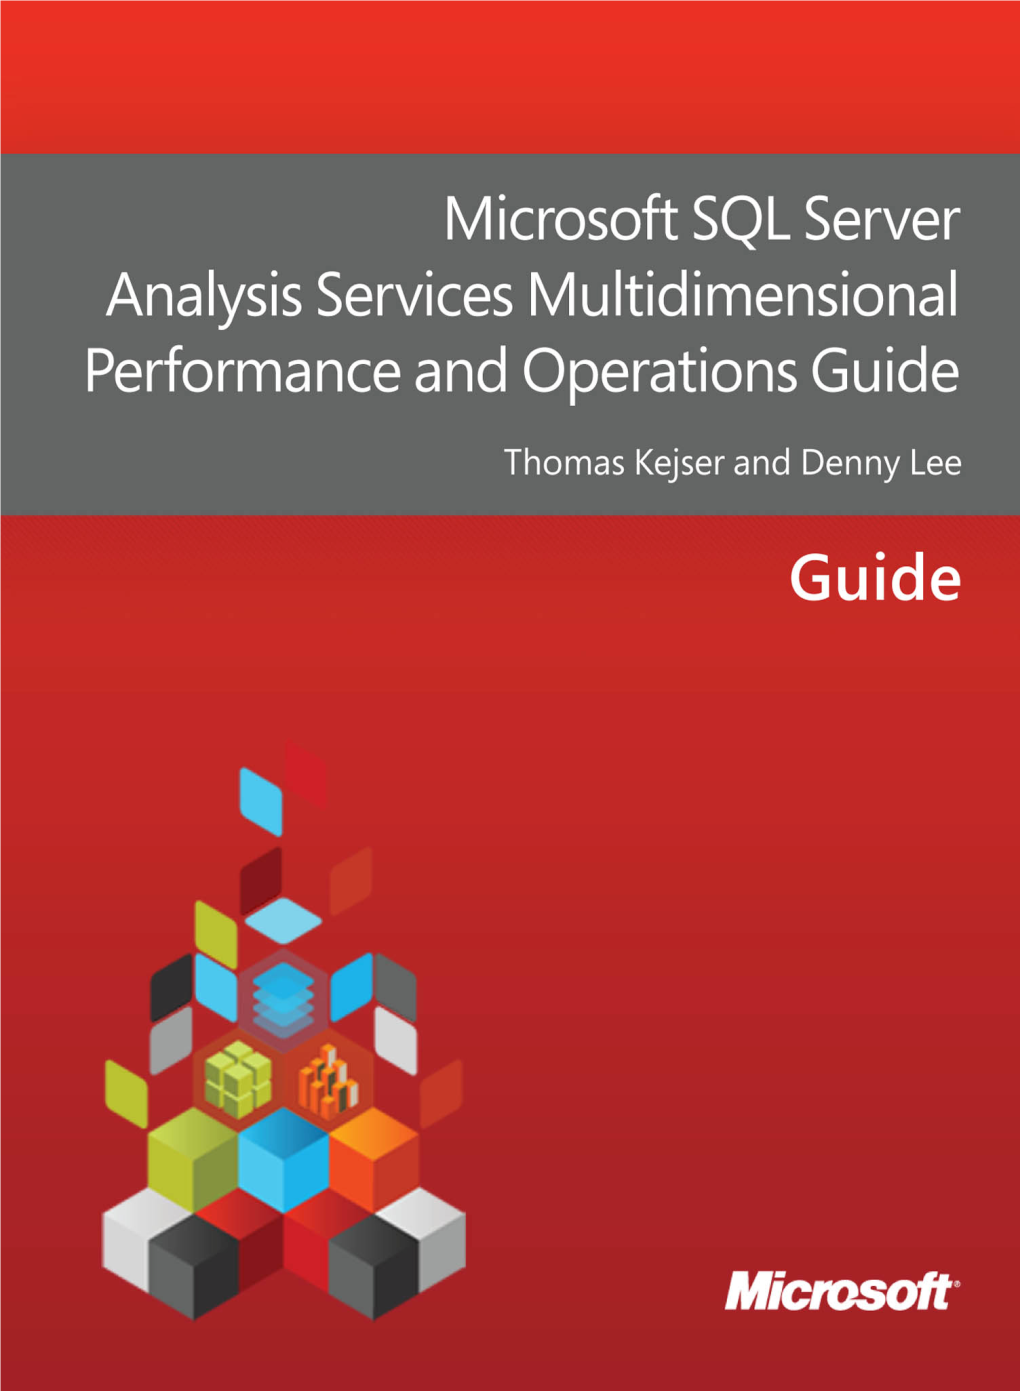 Microsoft SQL Server Analysis Services Multidimensional Performance and Operations Guide Thomas Kejser and Denny Lee